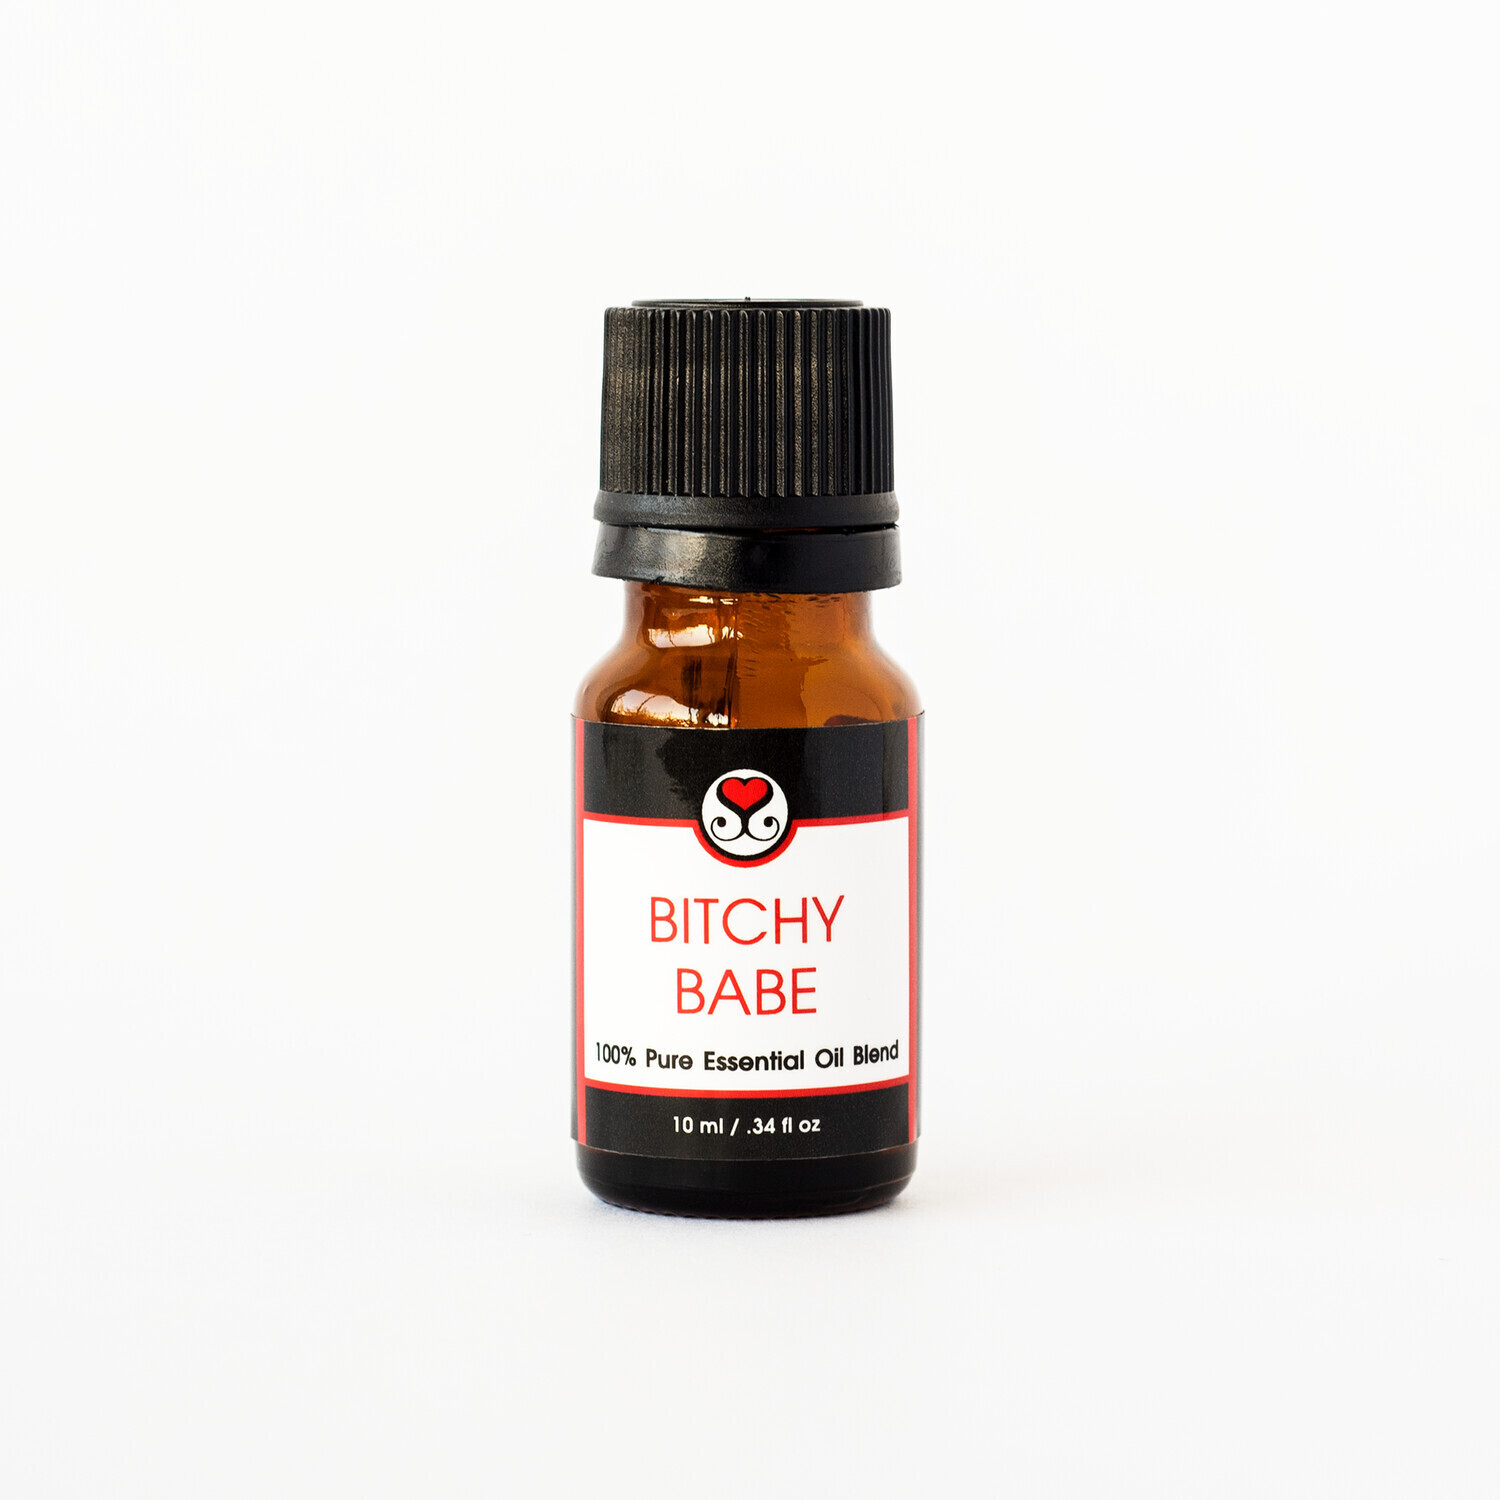 Bitchy Babe Essential Oil Blend